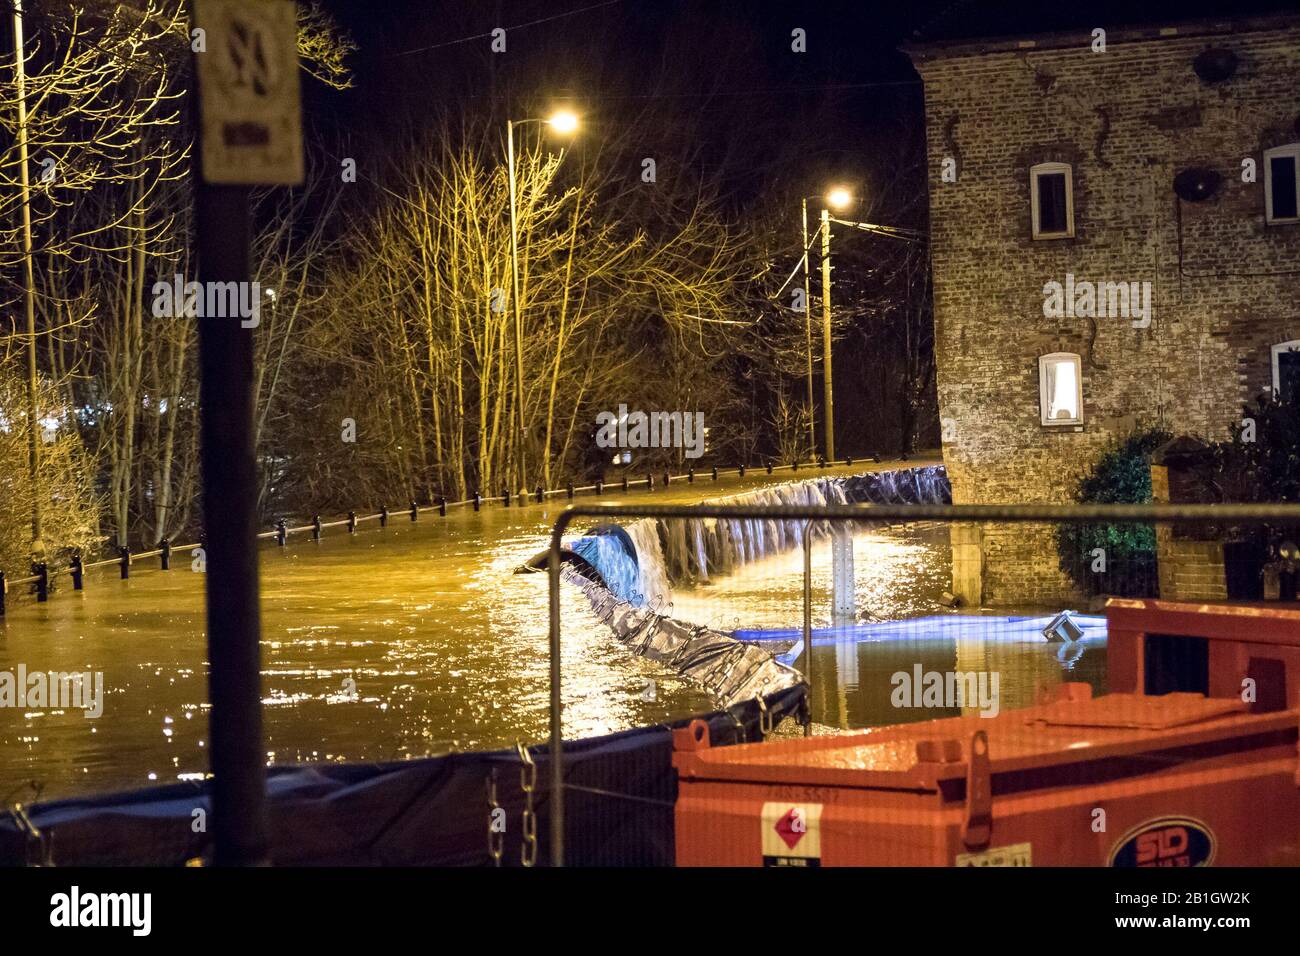 Bewdley, UK. 25th February, 2020. River levels reach an unprecedented high this evening at 9:30pm as flood water begins to dangerously pour over the top of the flood defence barriers at Beale's Corner in the Worcestershire town of Bewdley. Emergency services are in attendance working through the night ensuring industrial water pumps are in constant use pumping as much water as possible back into the River Severn and away from the perilously close surrounding propertiesn at risk. Credit: Lee Hudson/Alamy Live News Stock Photo